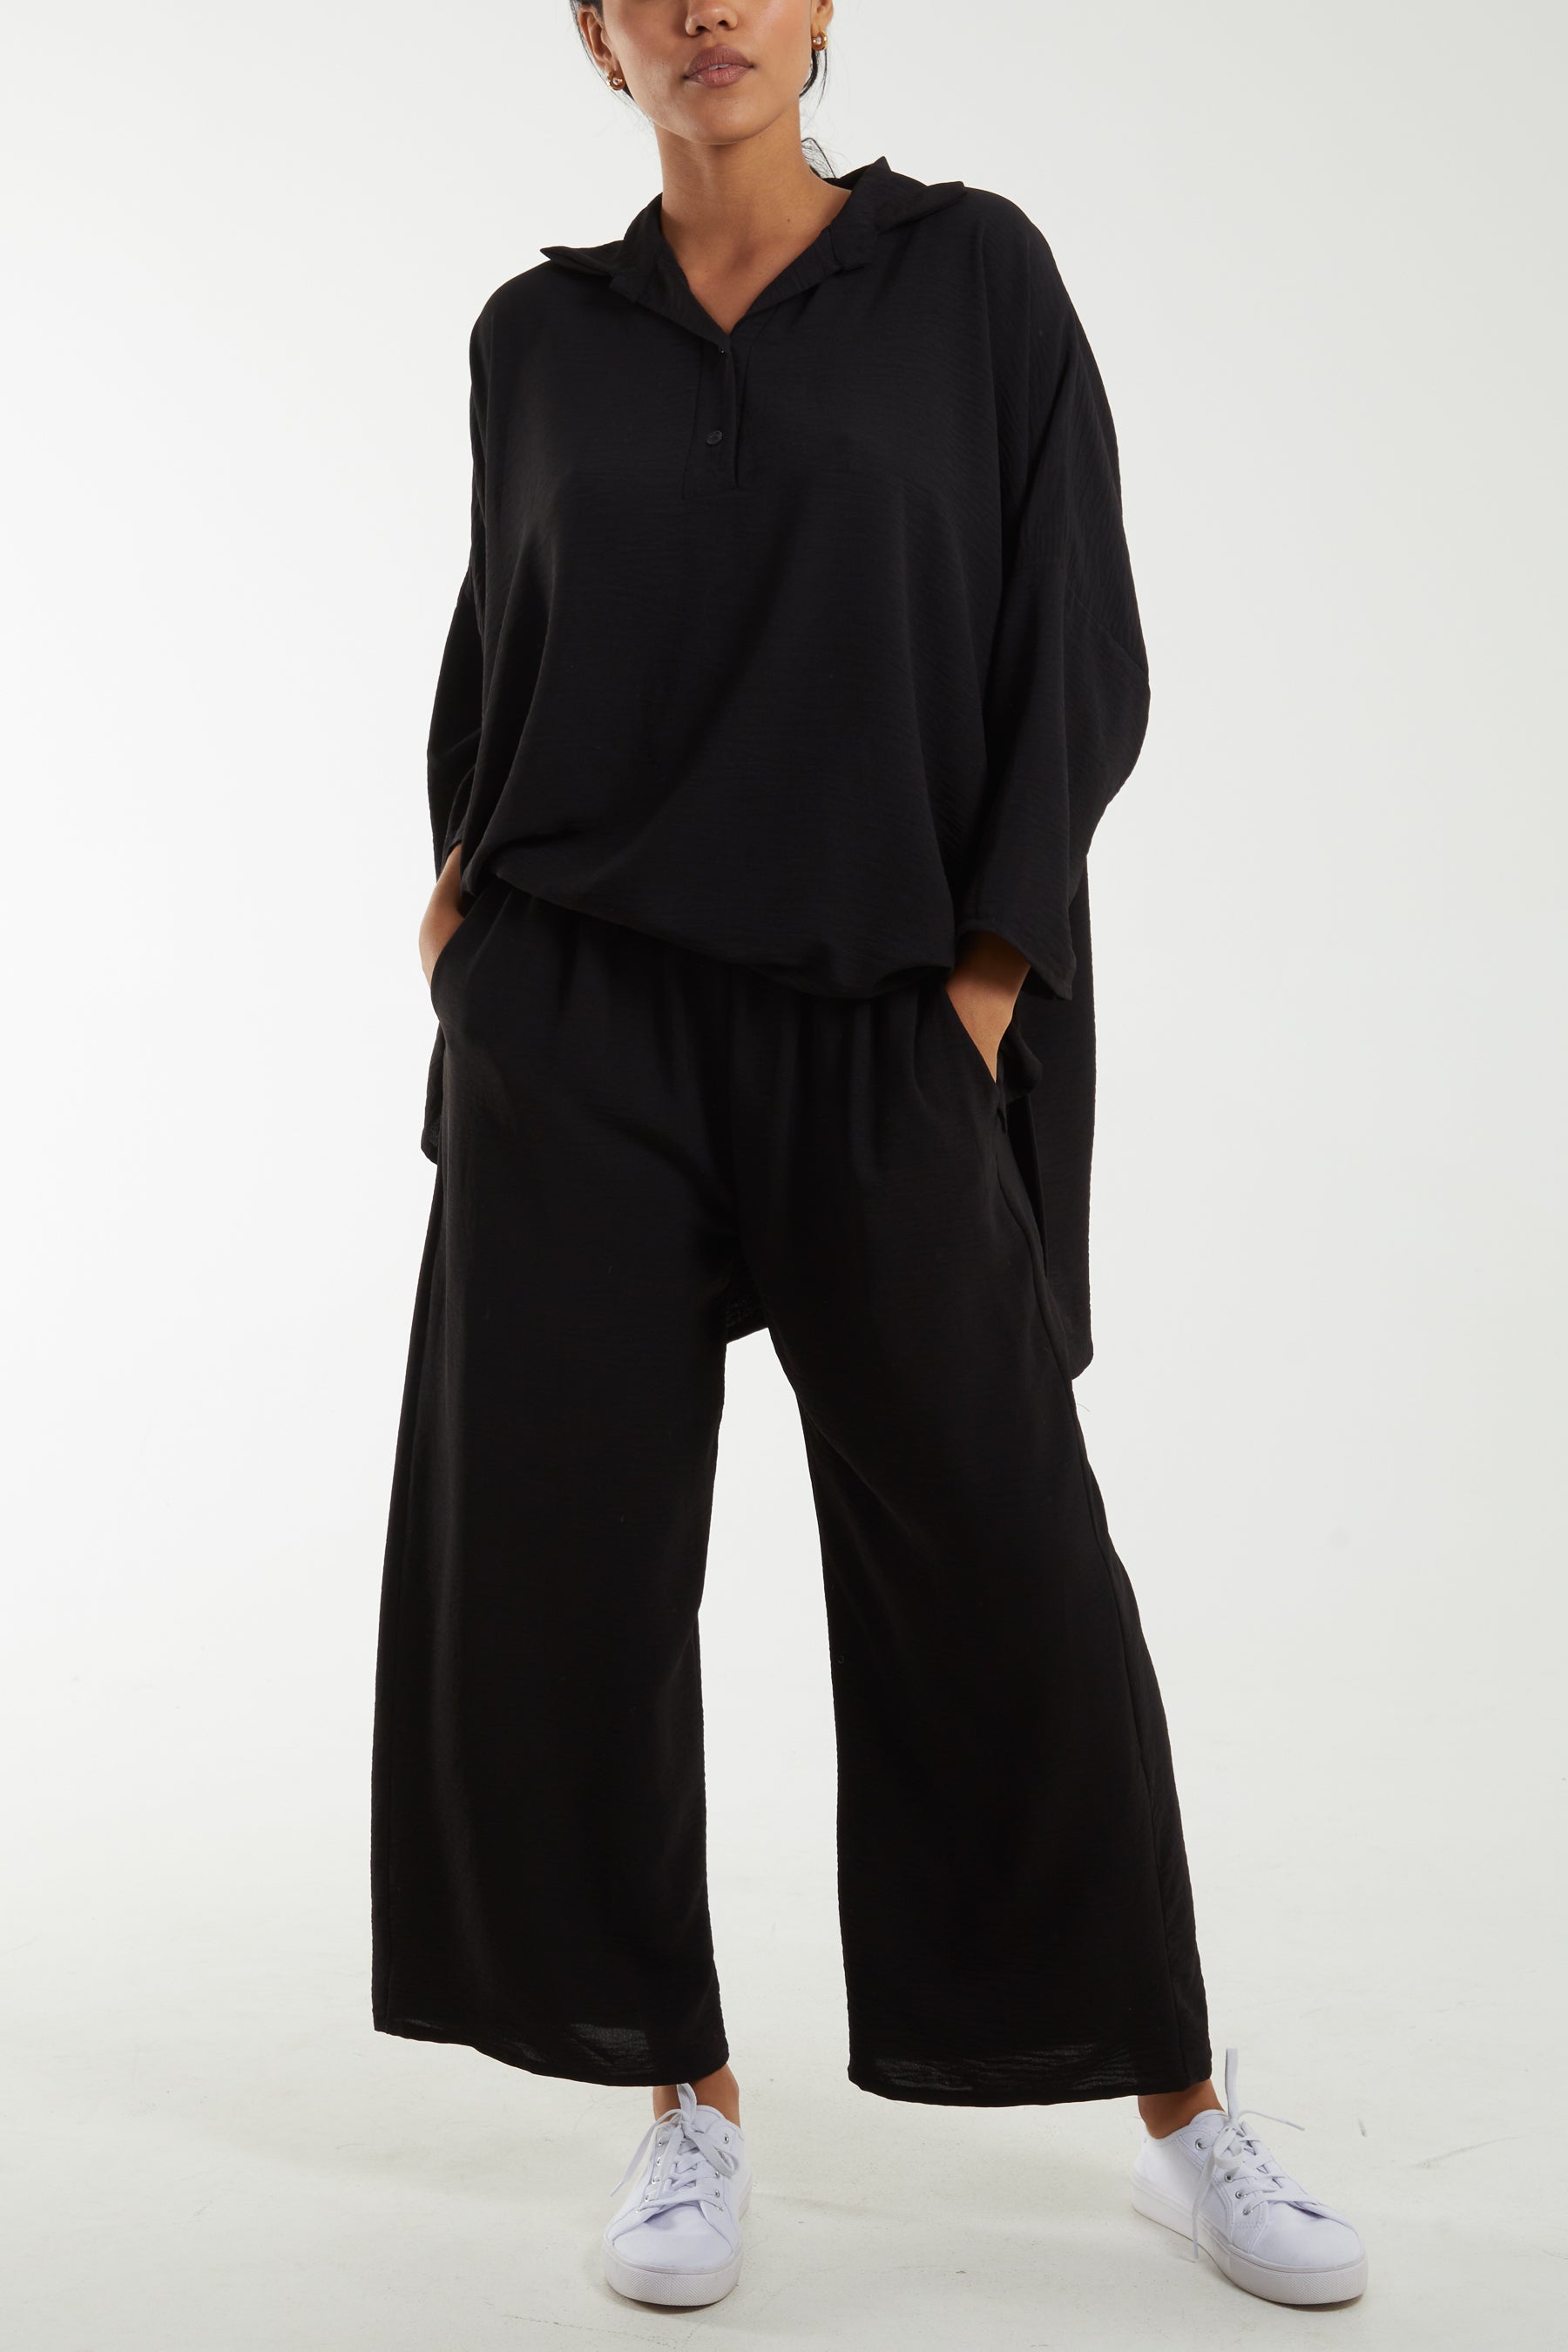 Blouse and Culotte Trousers Set